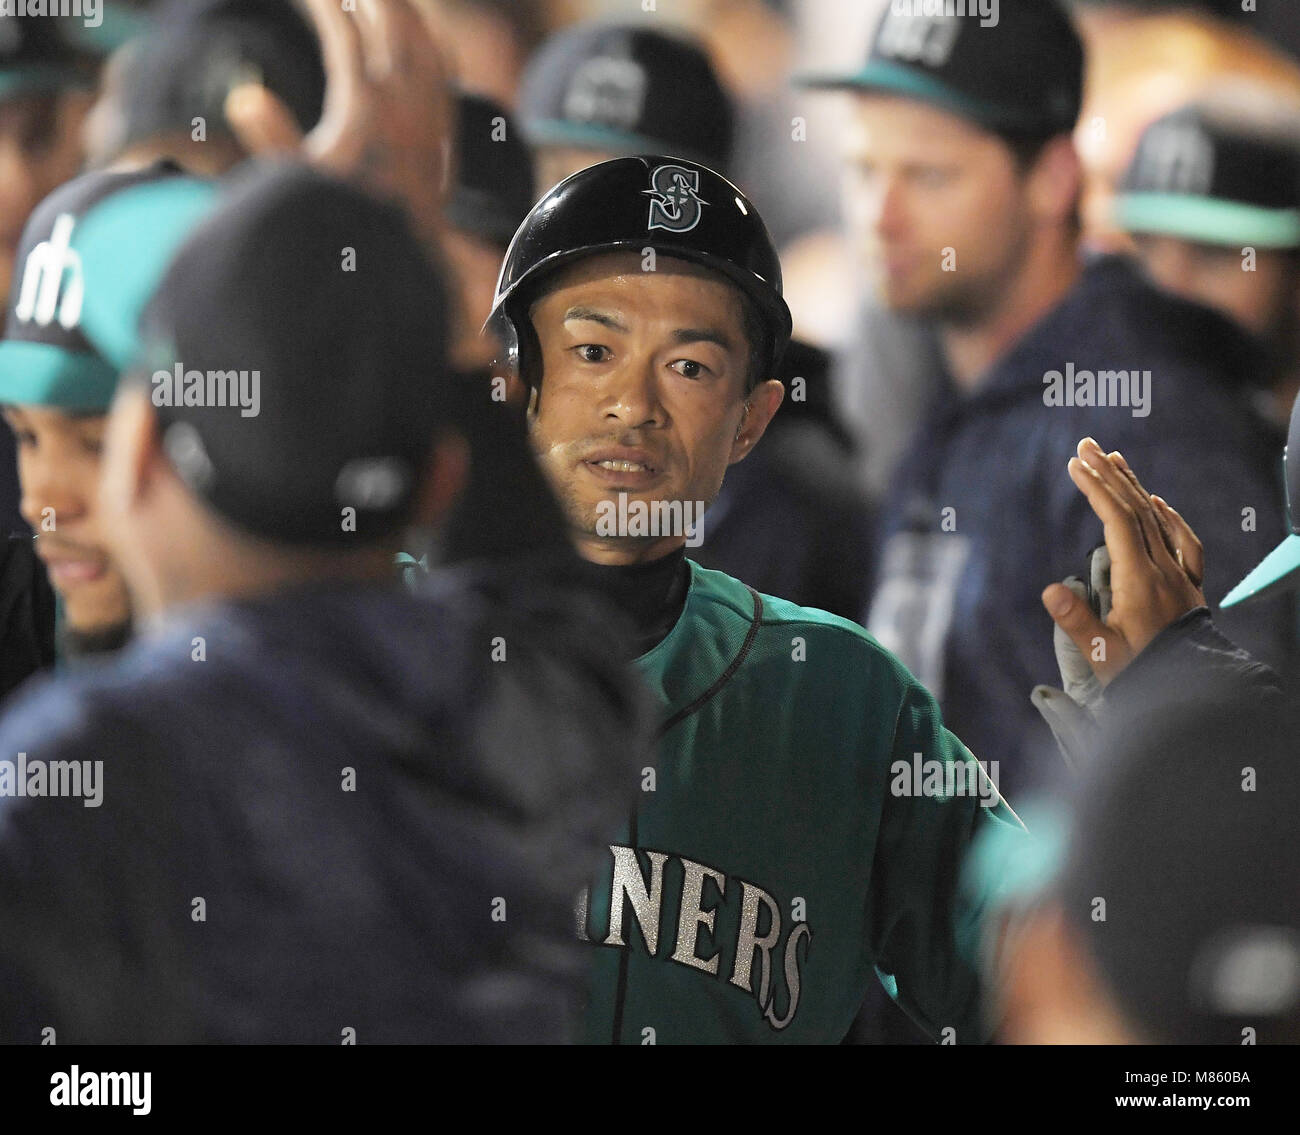 Ichiro Suzuki of the Seattle Mariners during the MLB Major League Baseball spring training game in Peoria, Arizona, United States. March 12, 2018. Credit: AFLO/Alamy Live News Stock Photo